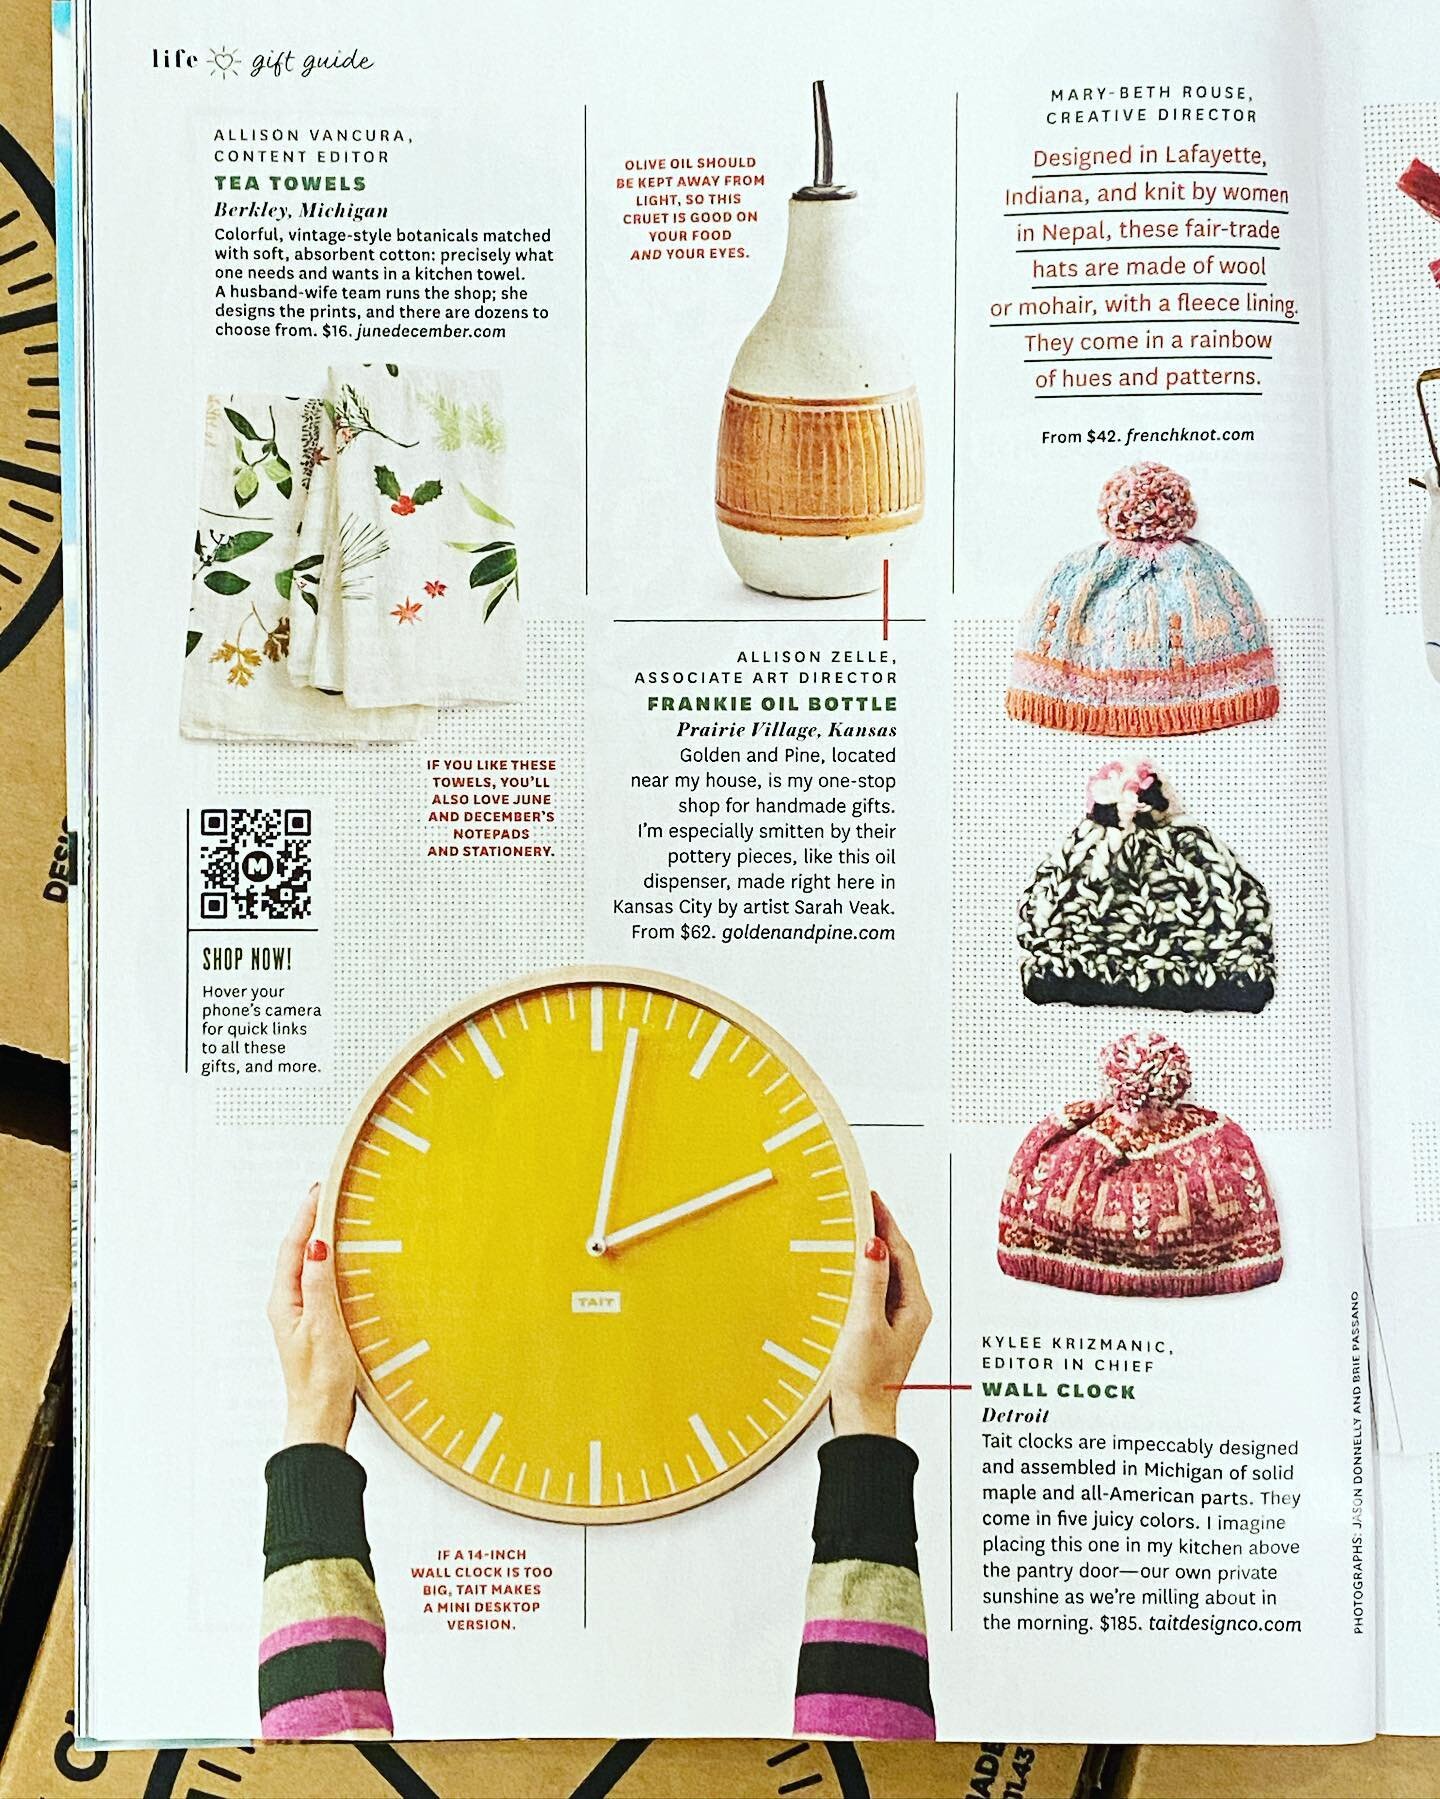 Thank you @midwestlivingmag and @kyleekriz for featuring our Wall Clock in their gift guide for the latest edition! We&rsquo;re in good company with our friends @juneanddecember on the same page. Nice!